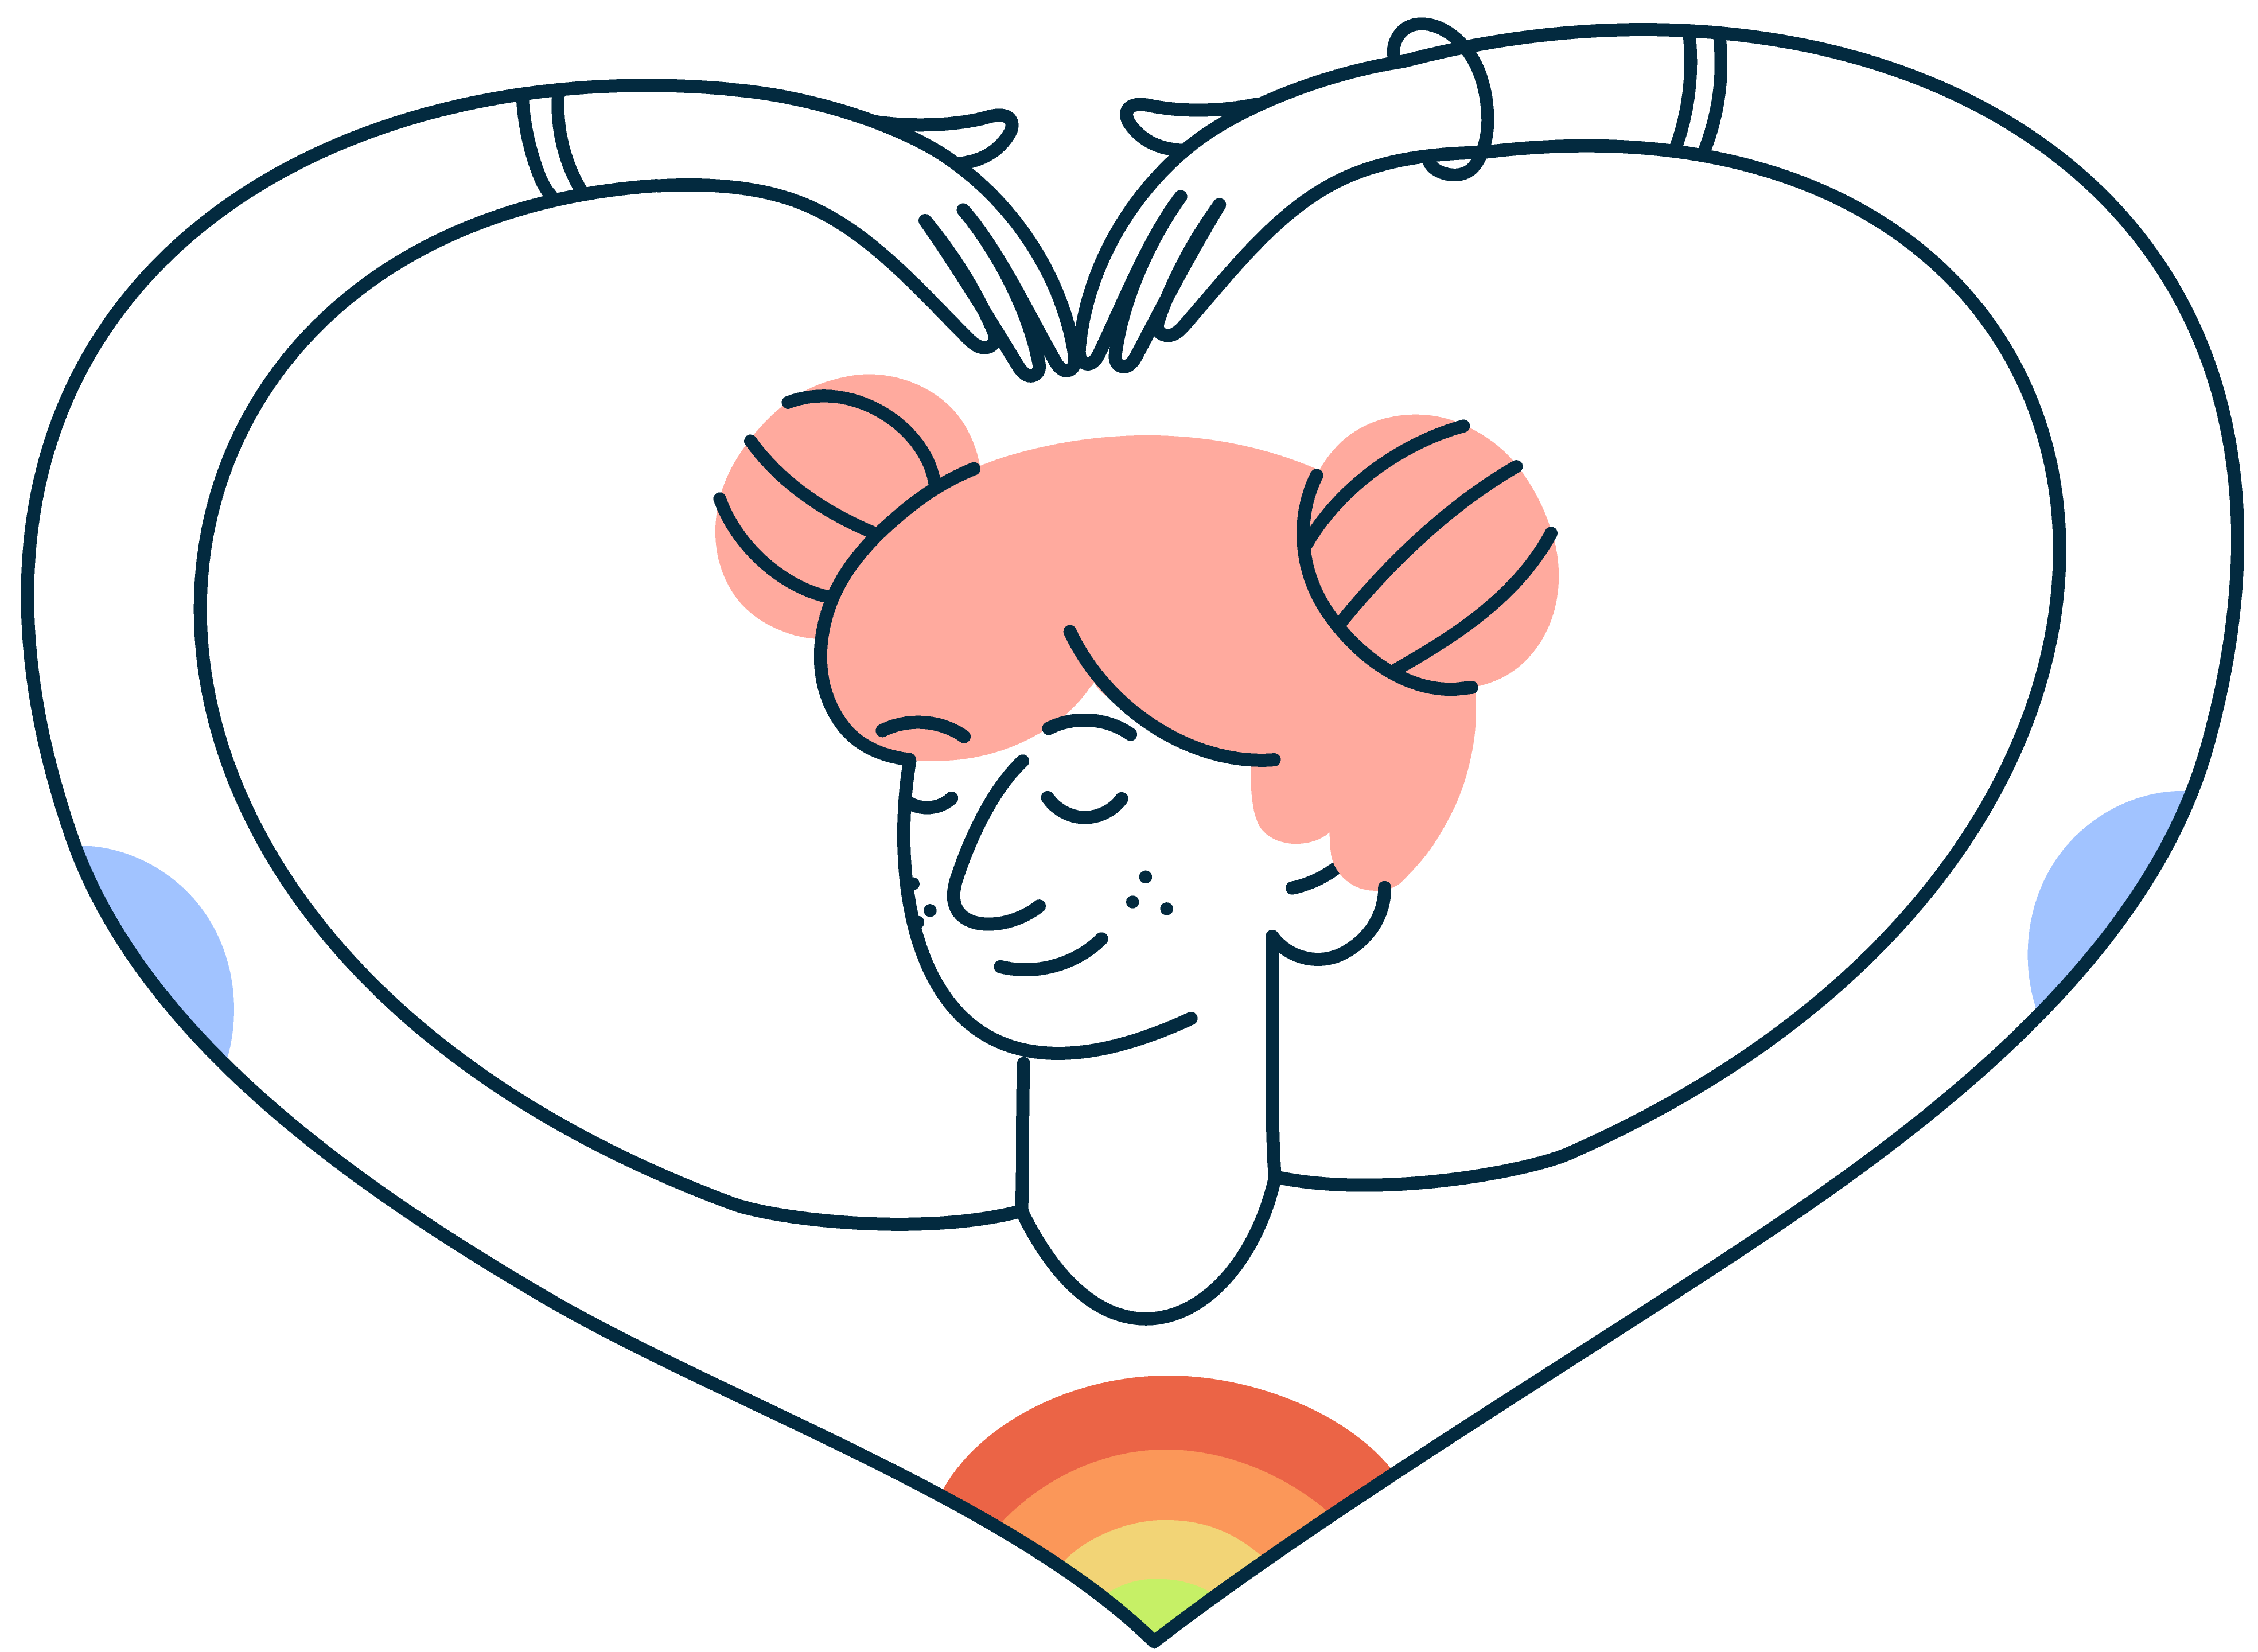 Illustration of a person making a heart with their arms.